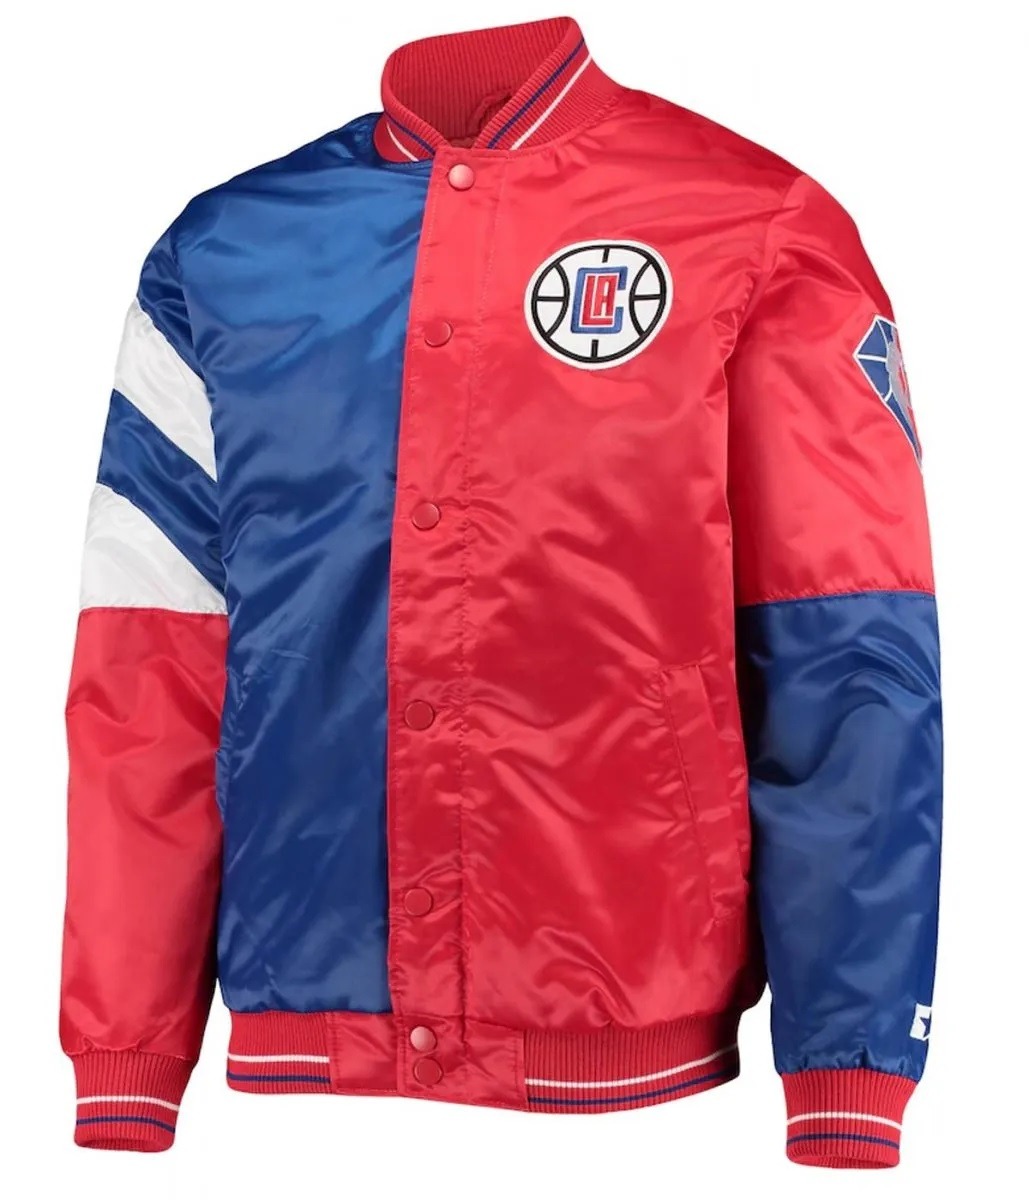 LA Clippers Color Block Satin Red and Blue Jacket